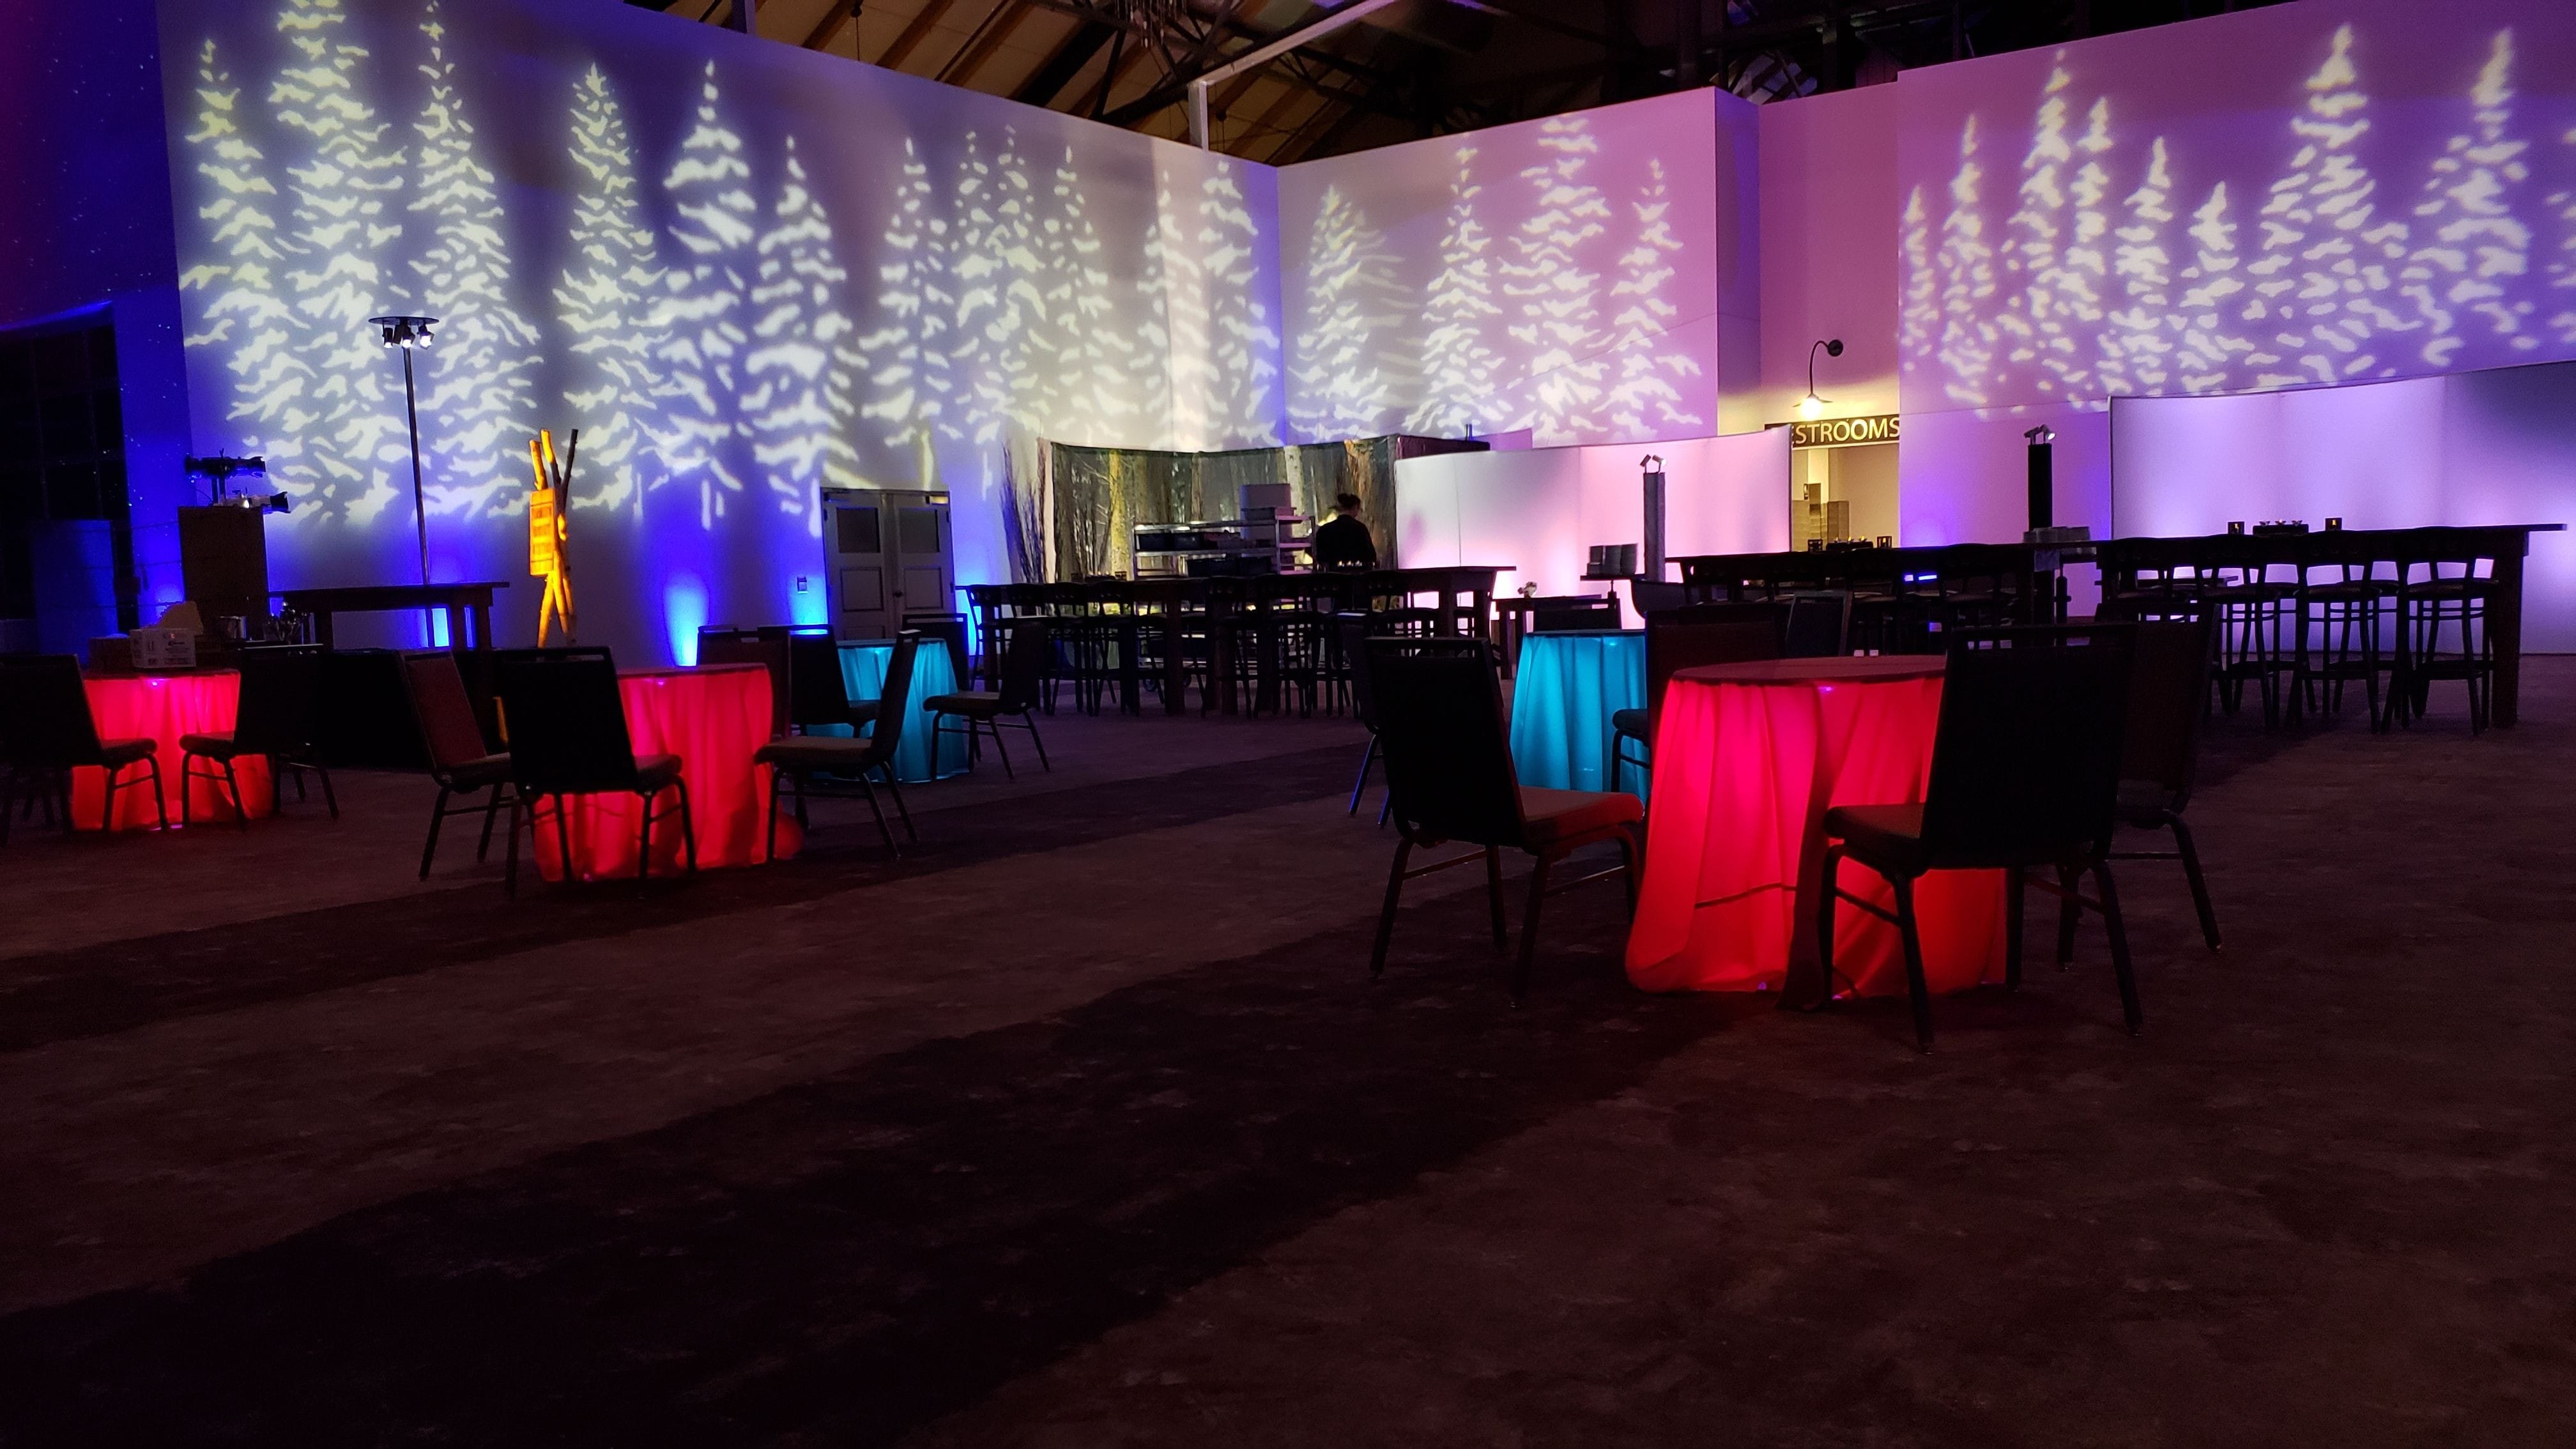 Renaissance Minneapolis, The Depot. Up lighting in blue and purple with tree gobos. Northern Lights dancing on the ceiling. Decor by Event Lab